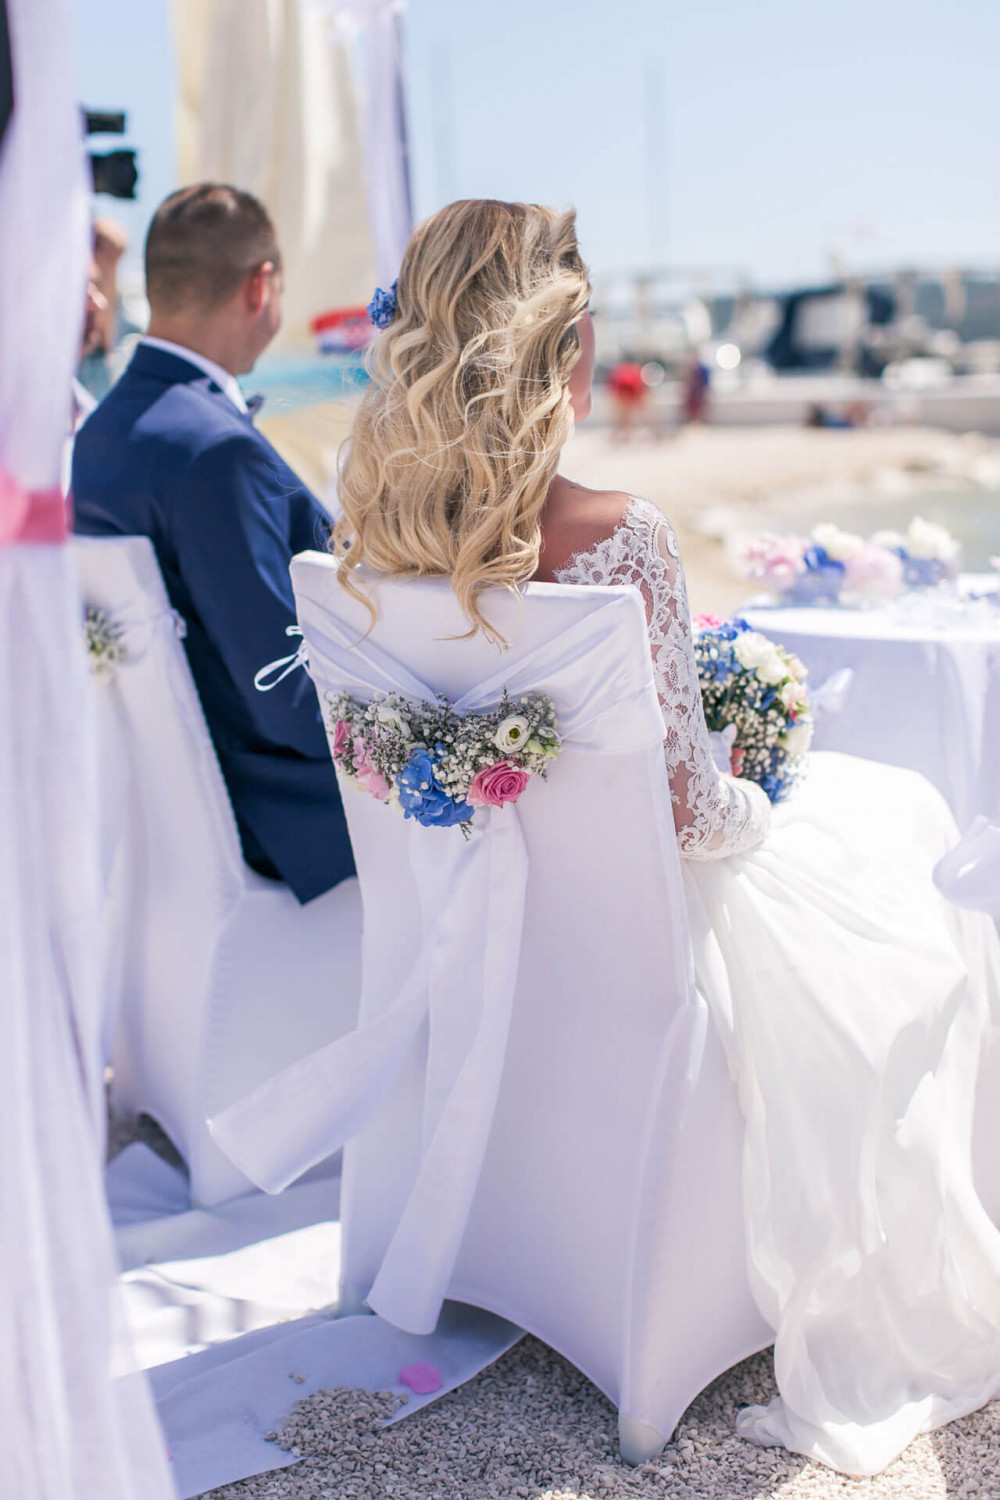 Celebrate your wedding in style at the Yachtclub